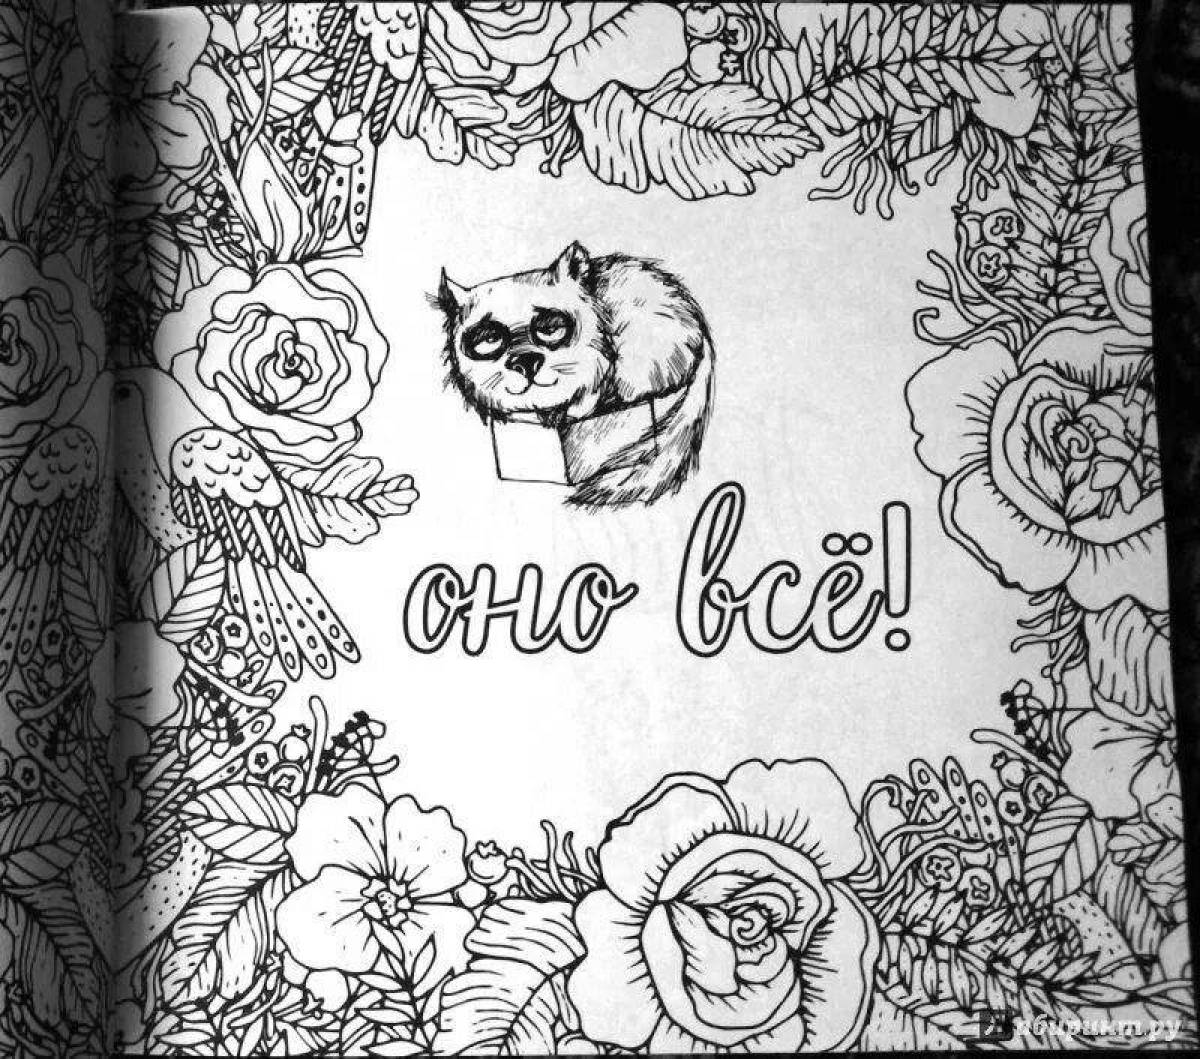 Enchanting you annoy me antistress coloring book